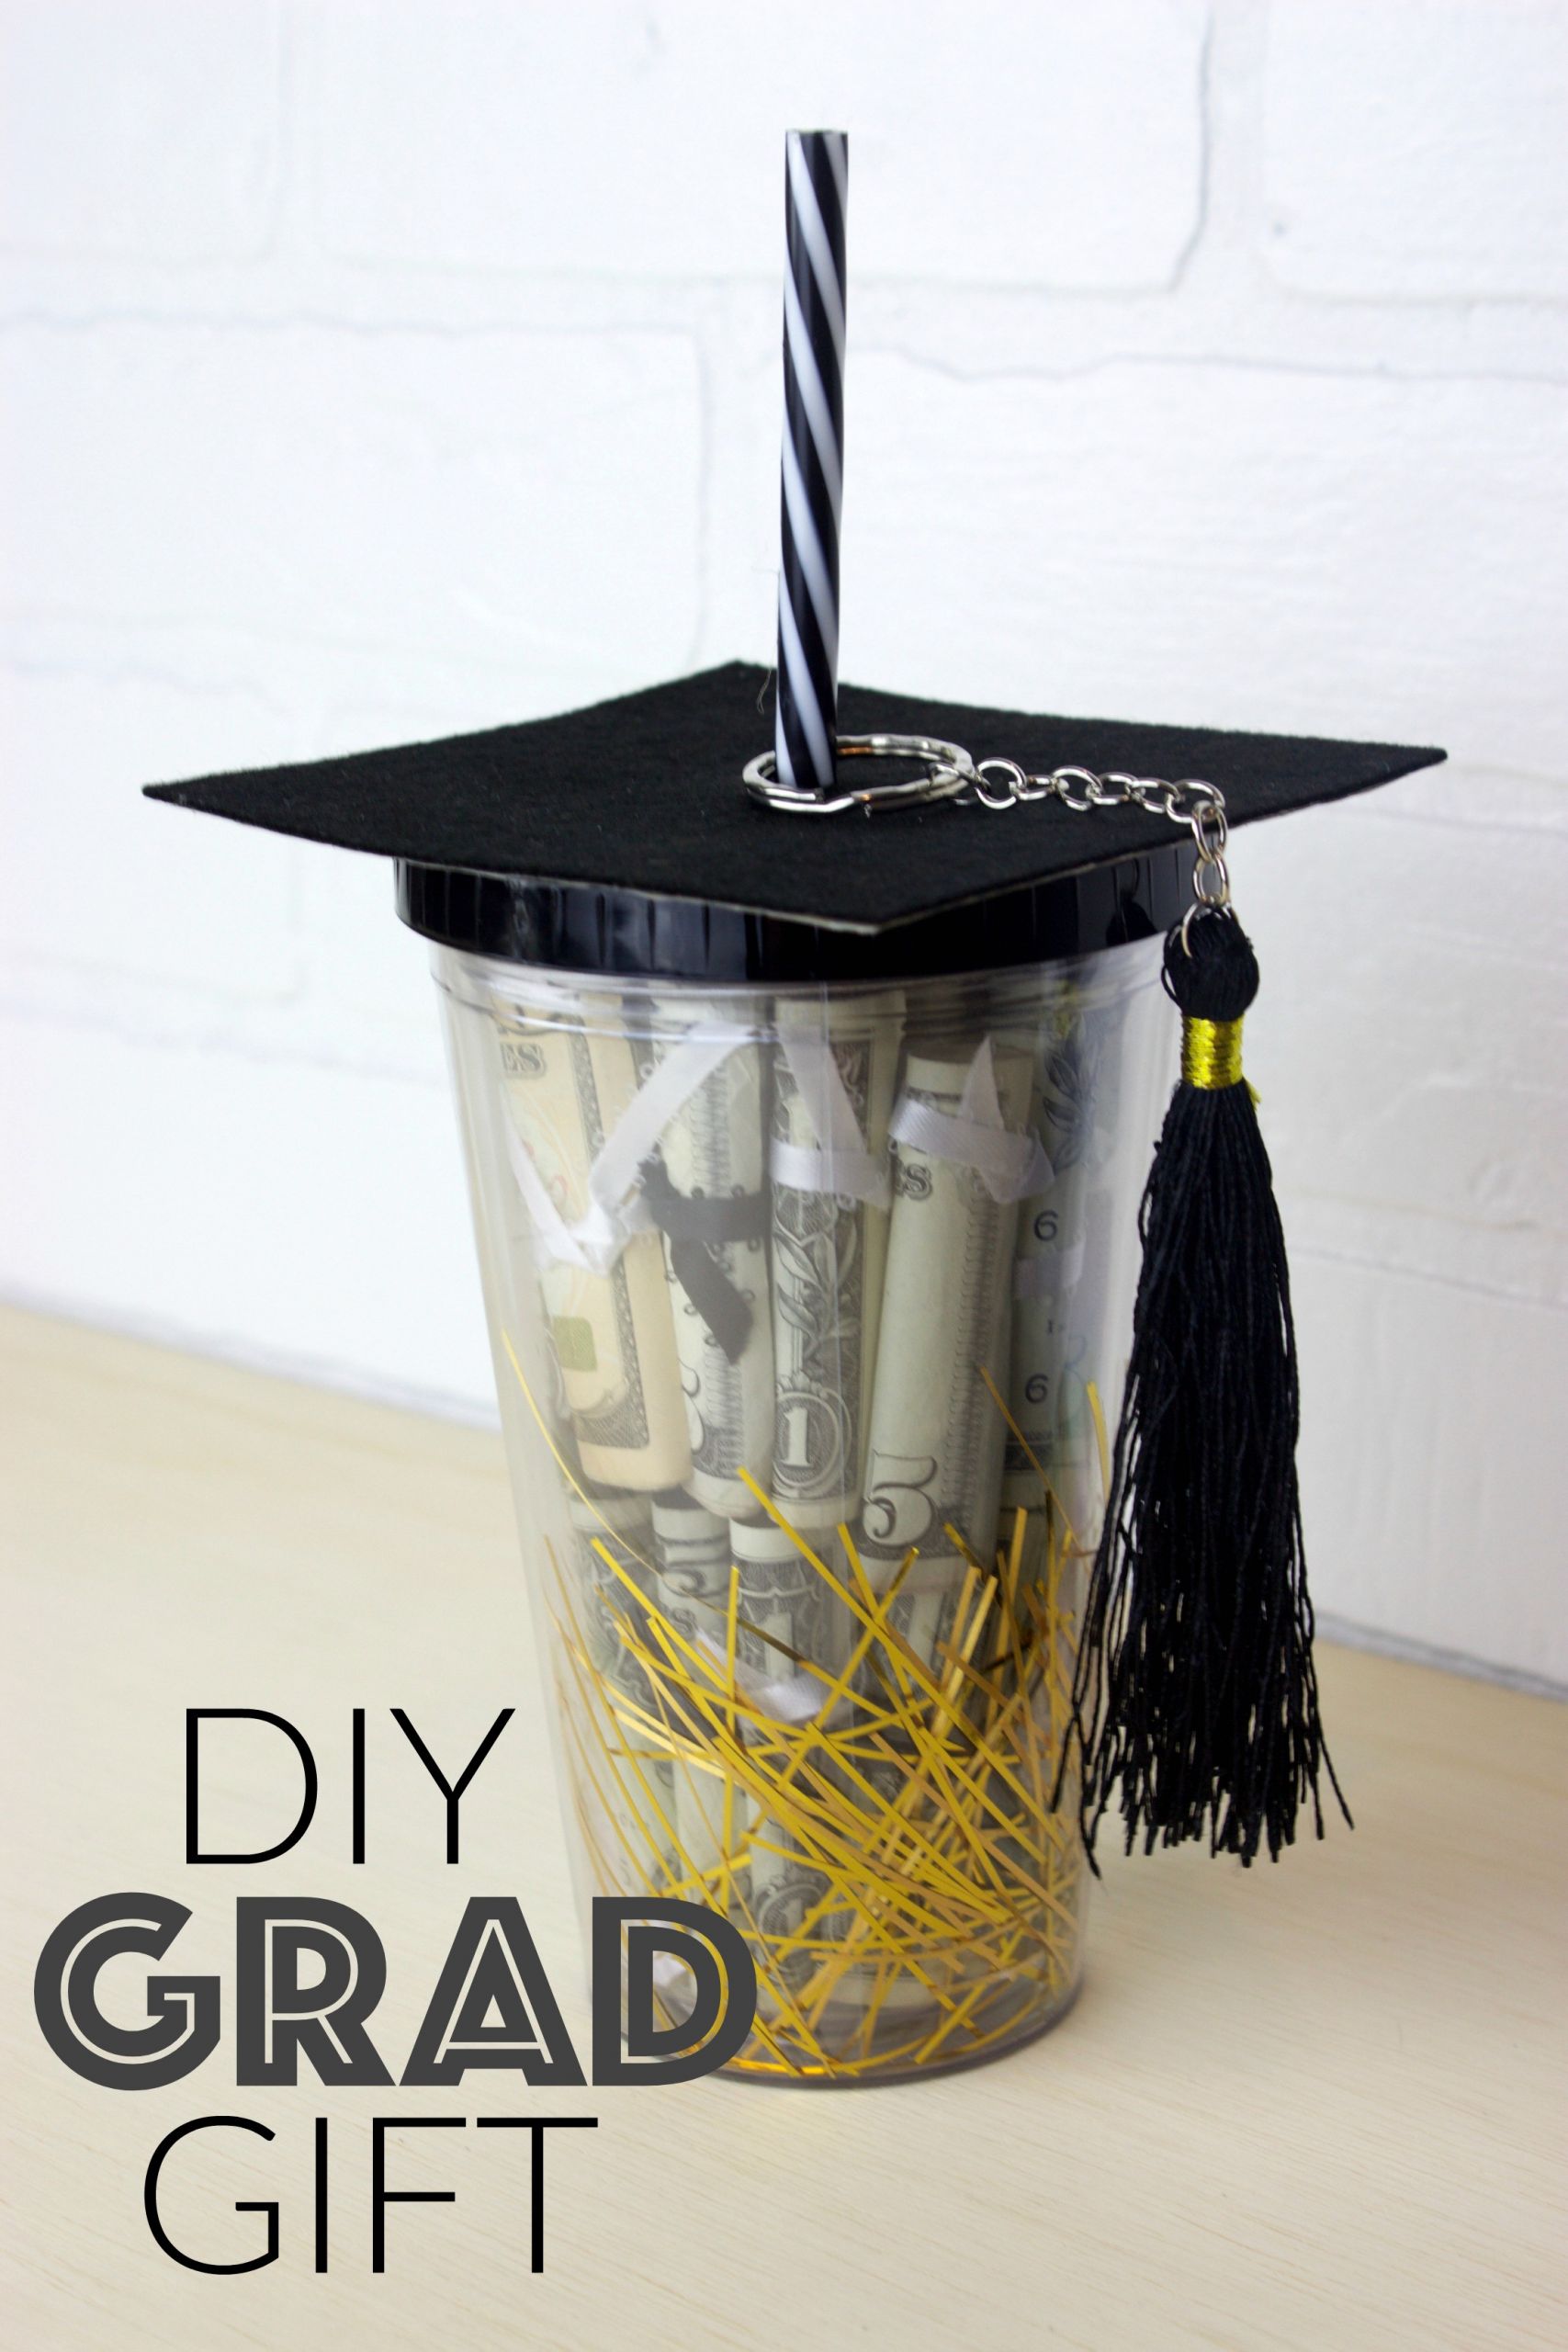 DIY Money Gift Ideas
 DIY Graduation Gift in a CupA Little Craft In Your Day